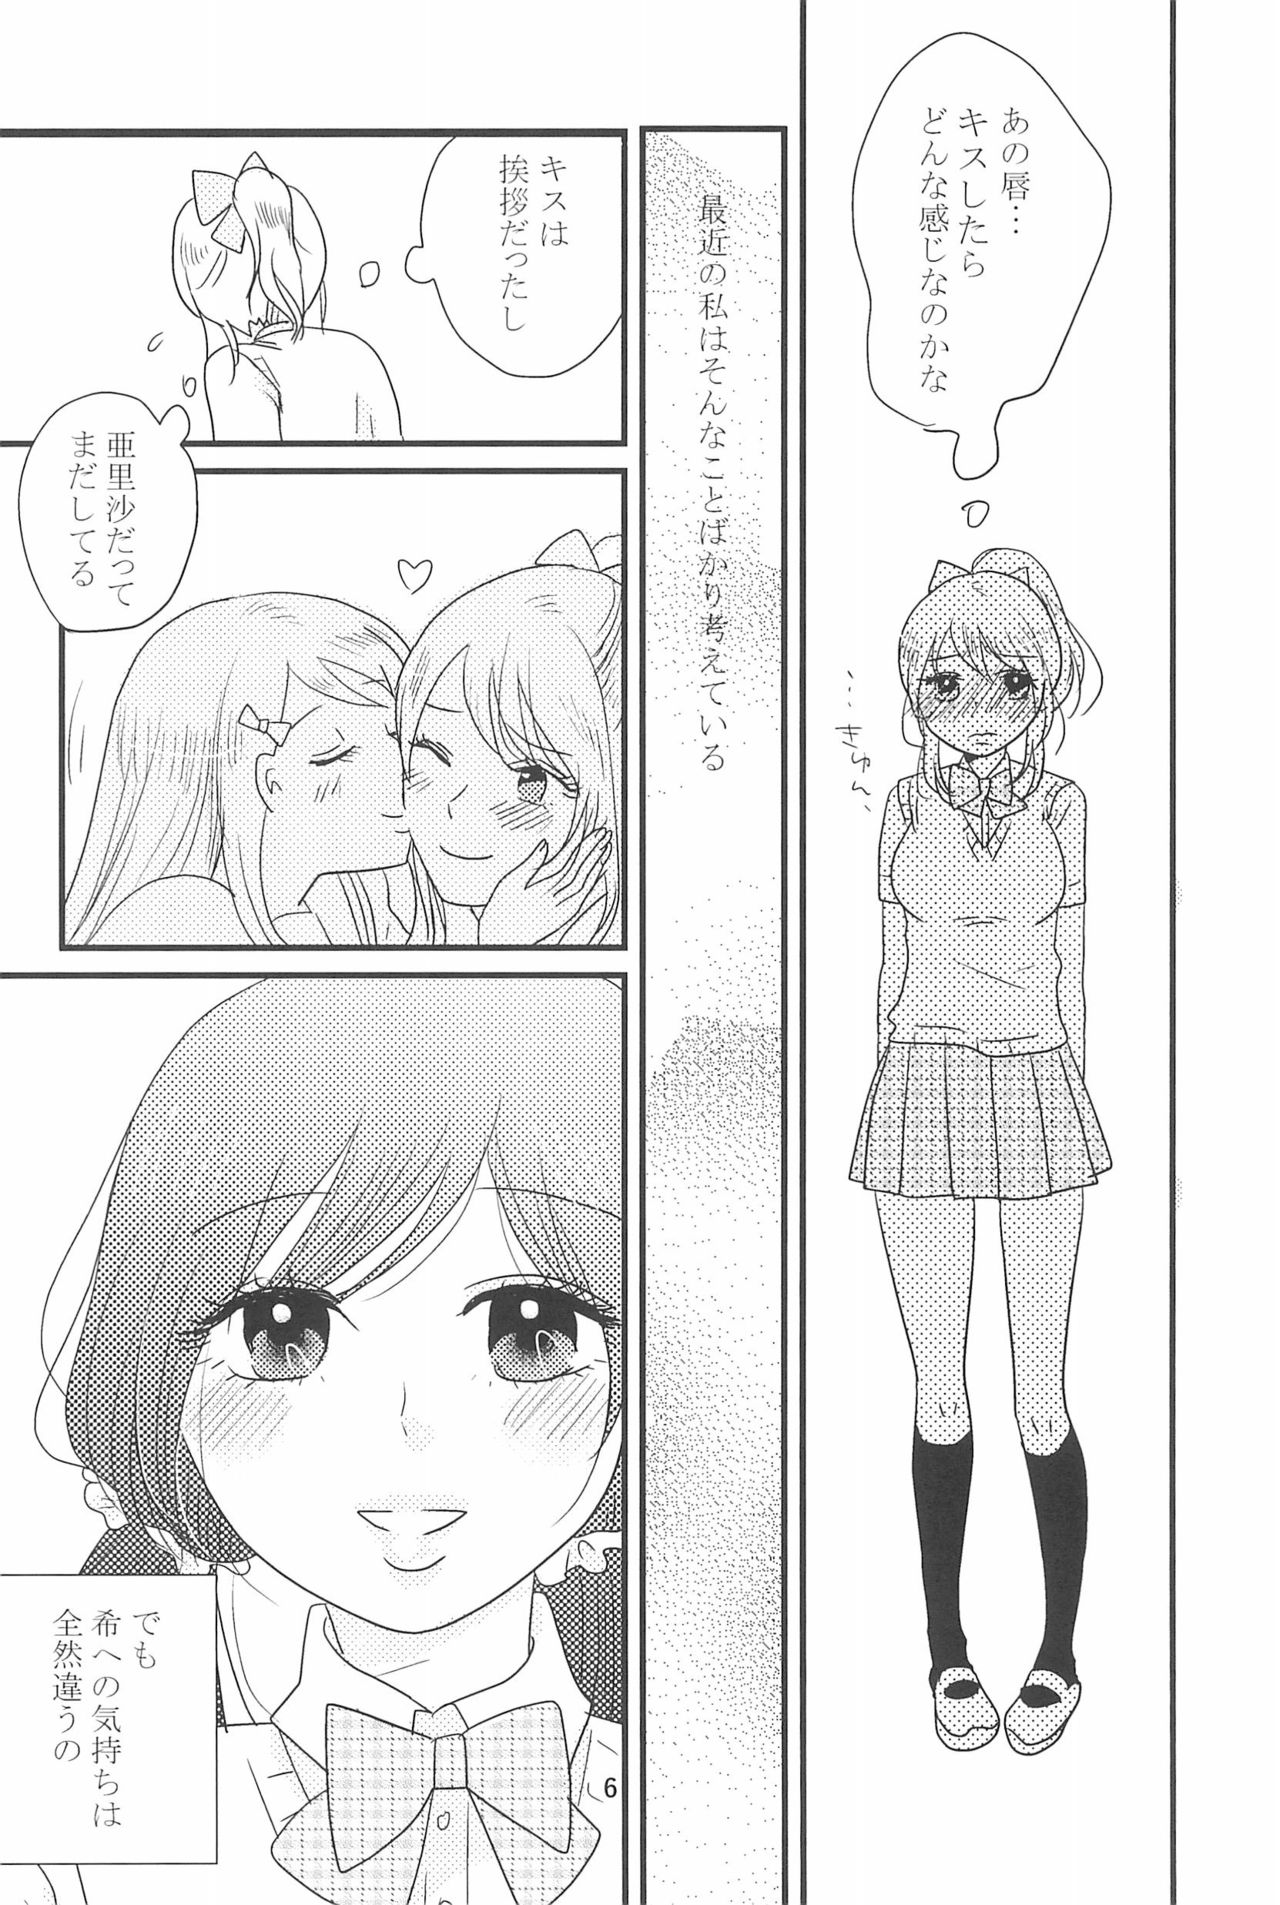 (C90) [BK*N2 (Mikawa Miso)] HAPPY GO LUCKY DAYS (Love Live!) page 10 full